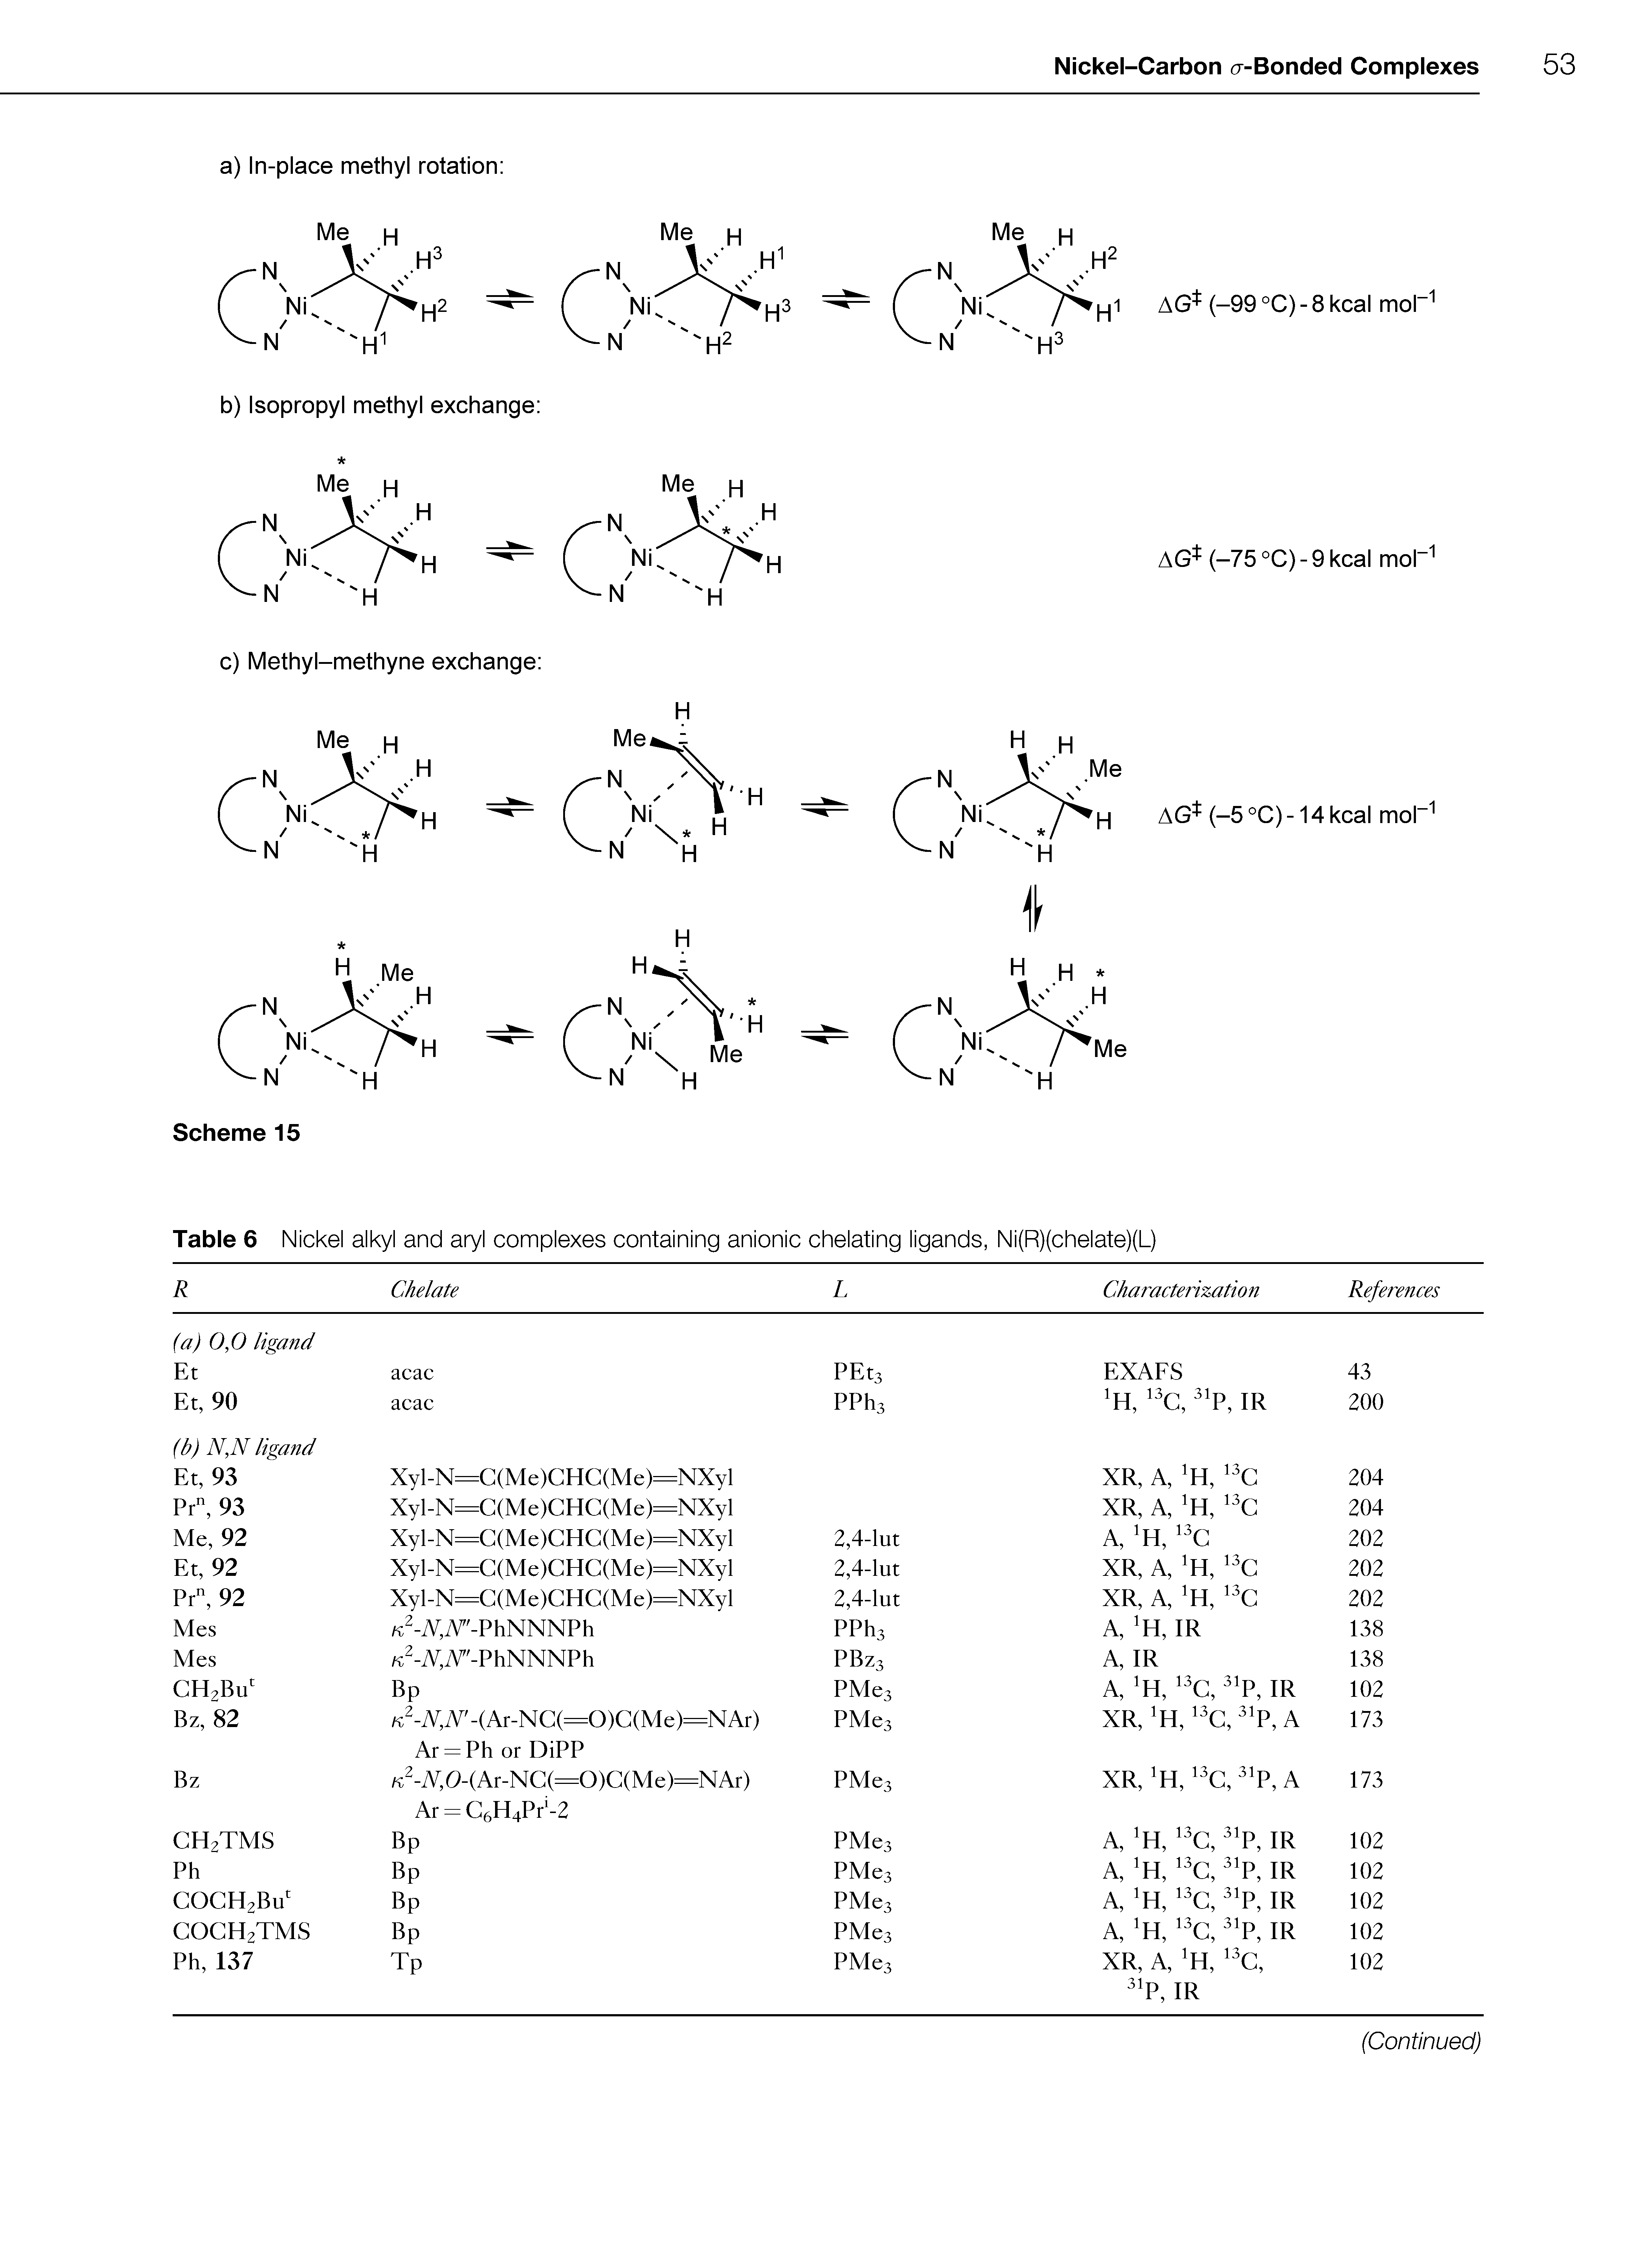 Table 6 Nickel alkyl and aryl complexes containing anionic chelating ligands, Ni(R)(chelate)(L)...